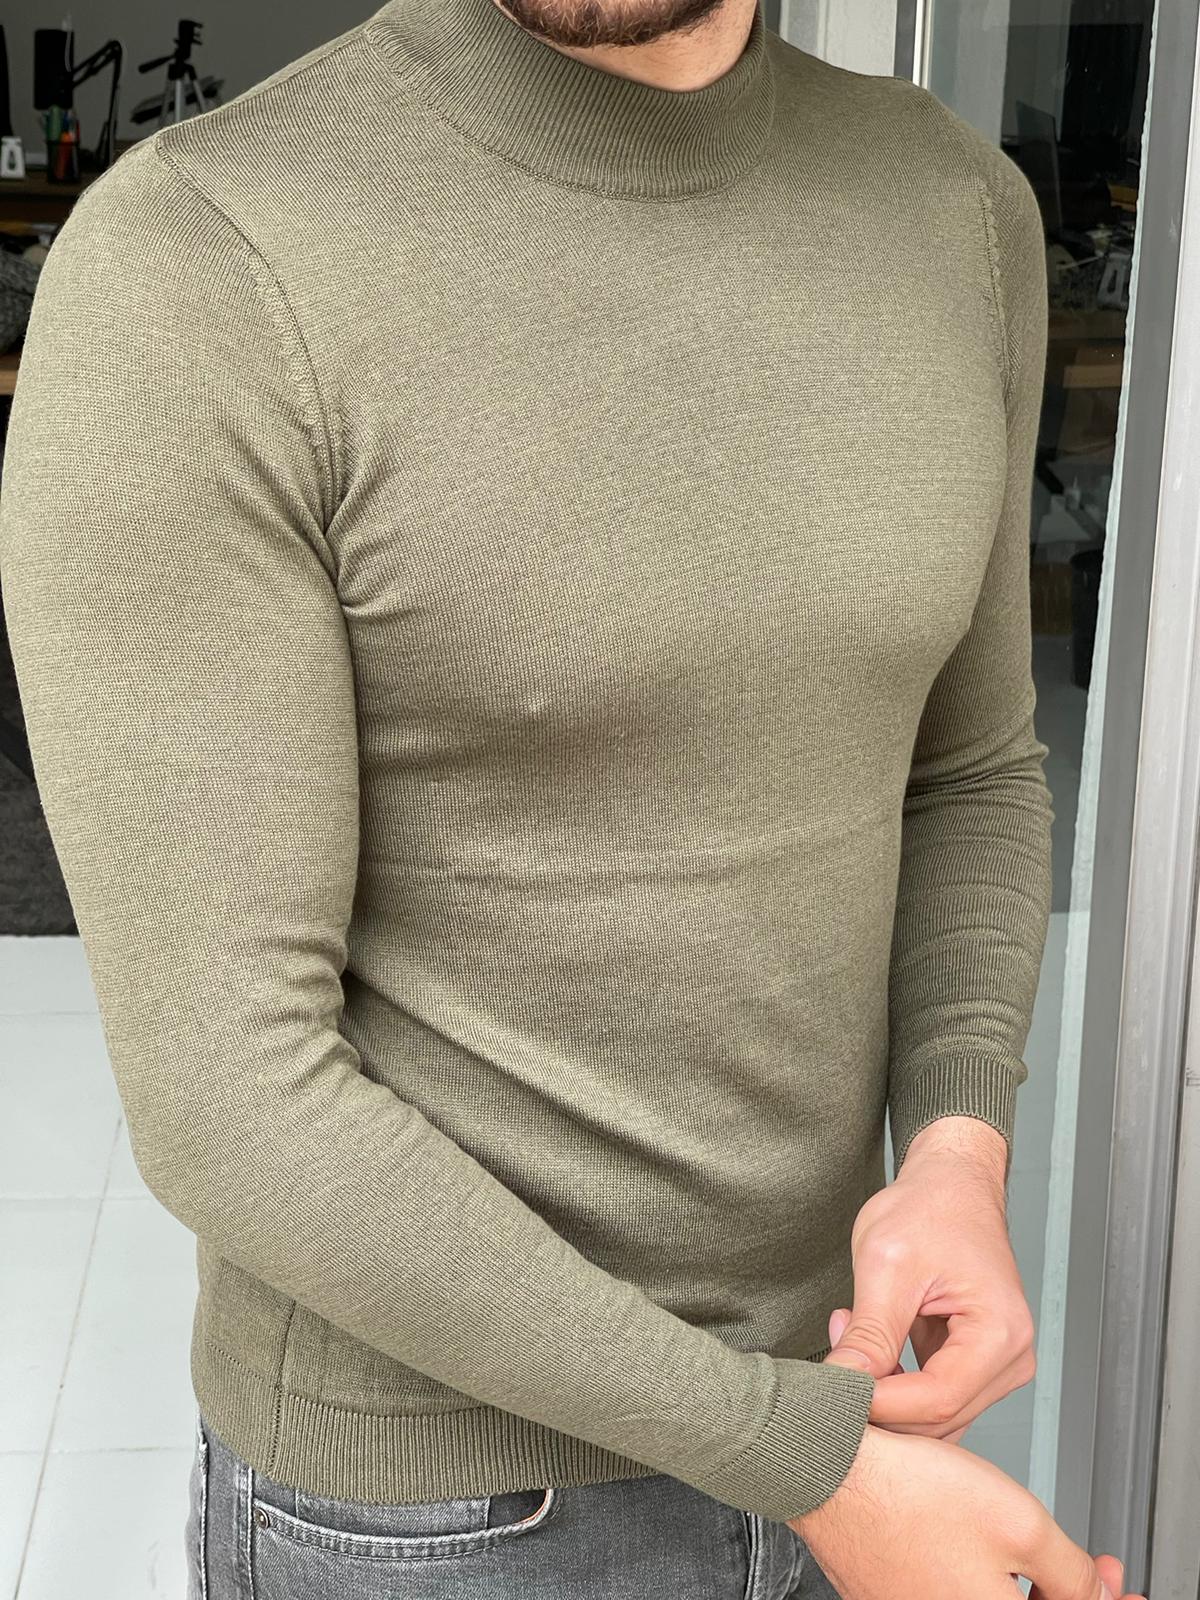 A stylish khaki turtleneck sweater by Hollo. The sweater is made of soft, ribbed fabric and features a high neckline.